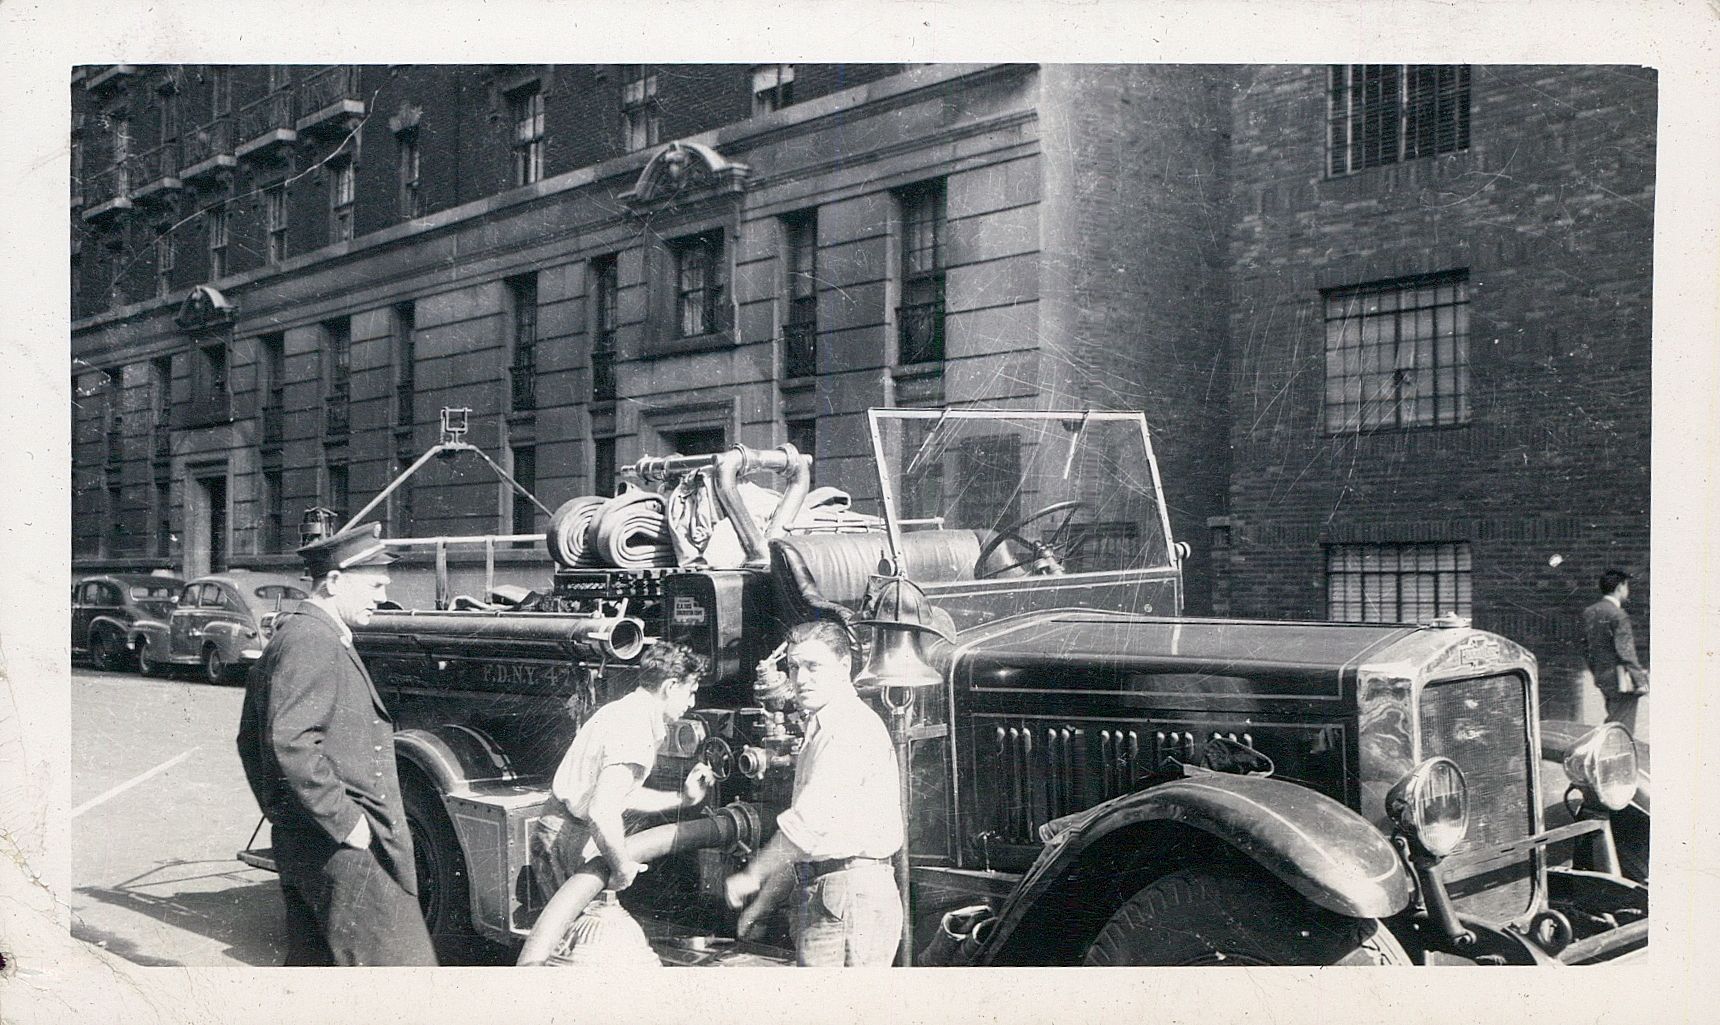 Firetruck of Engine Company 47 in 1948.